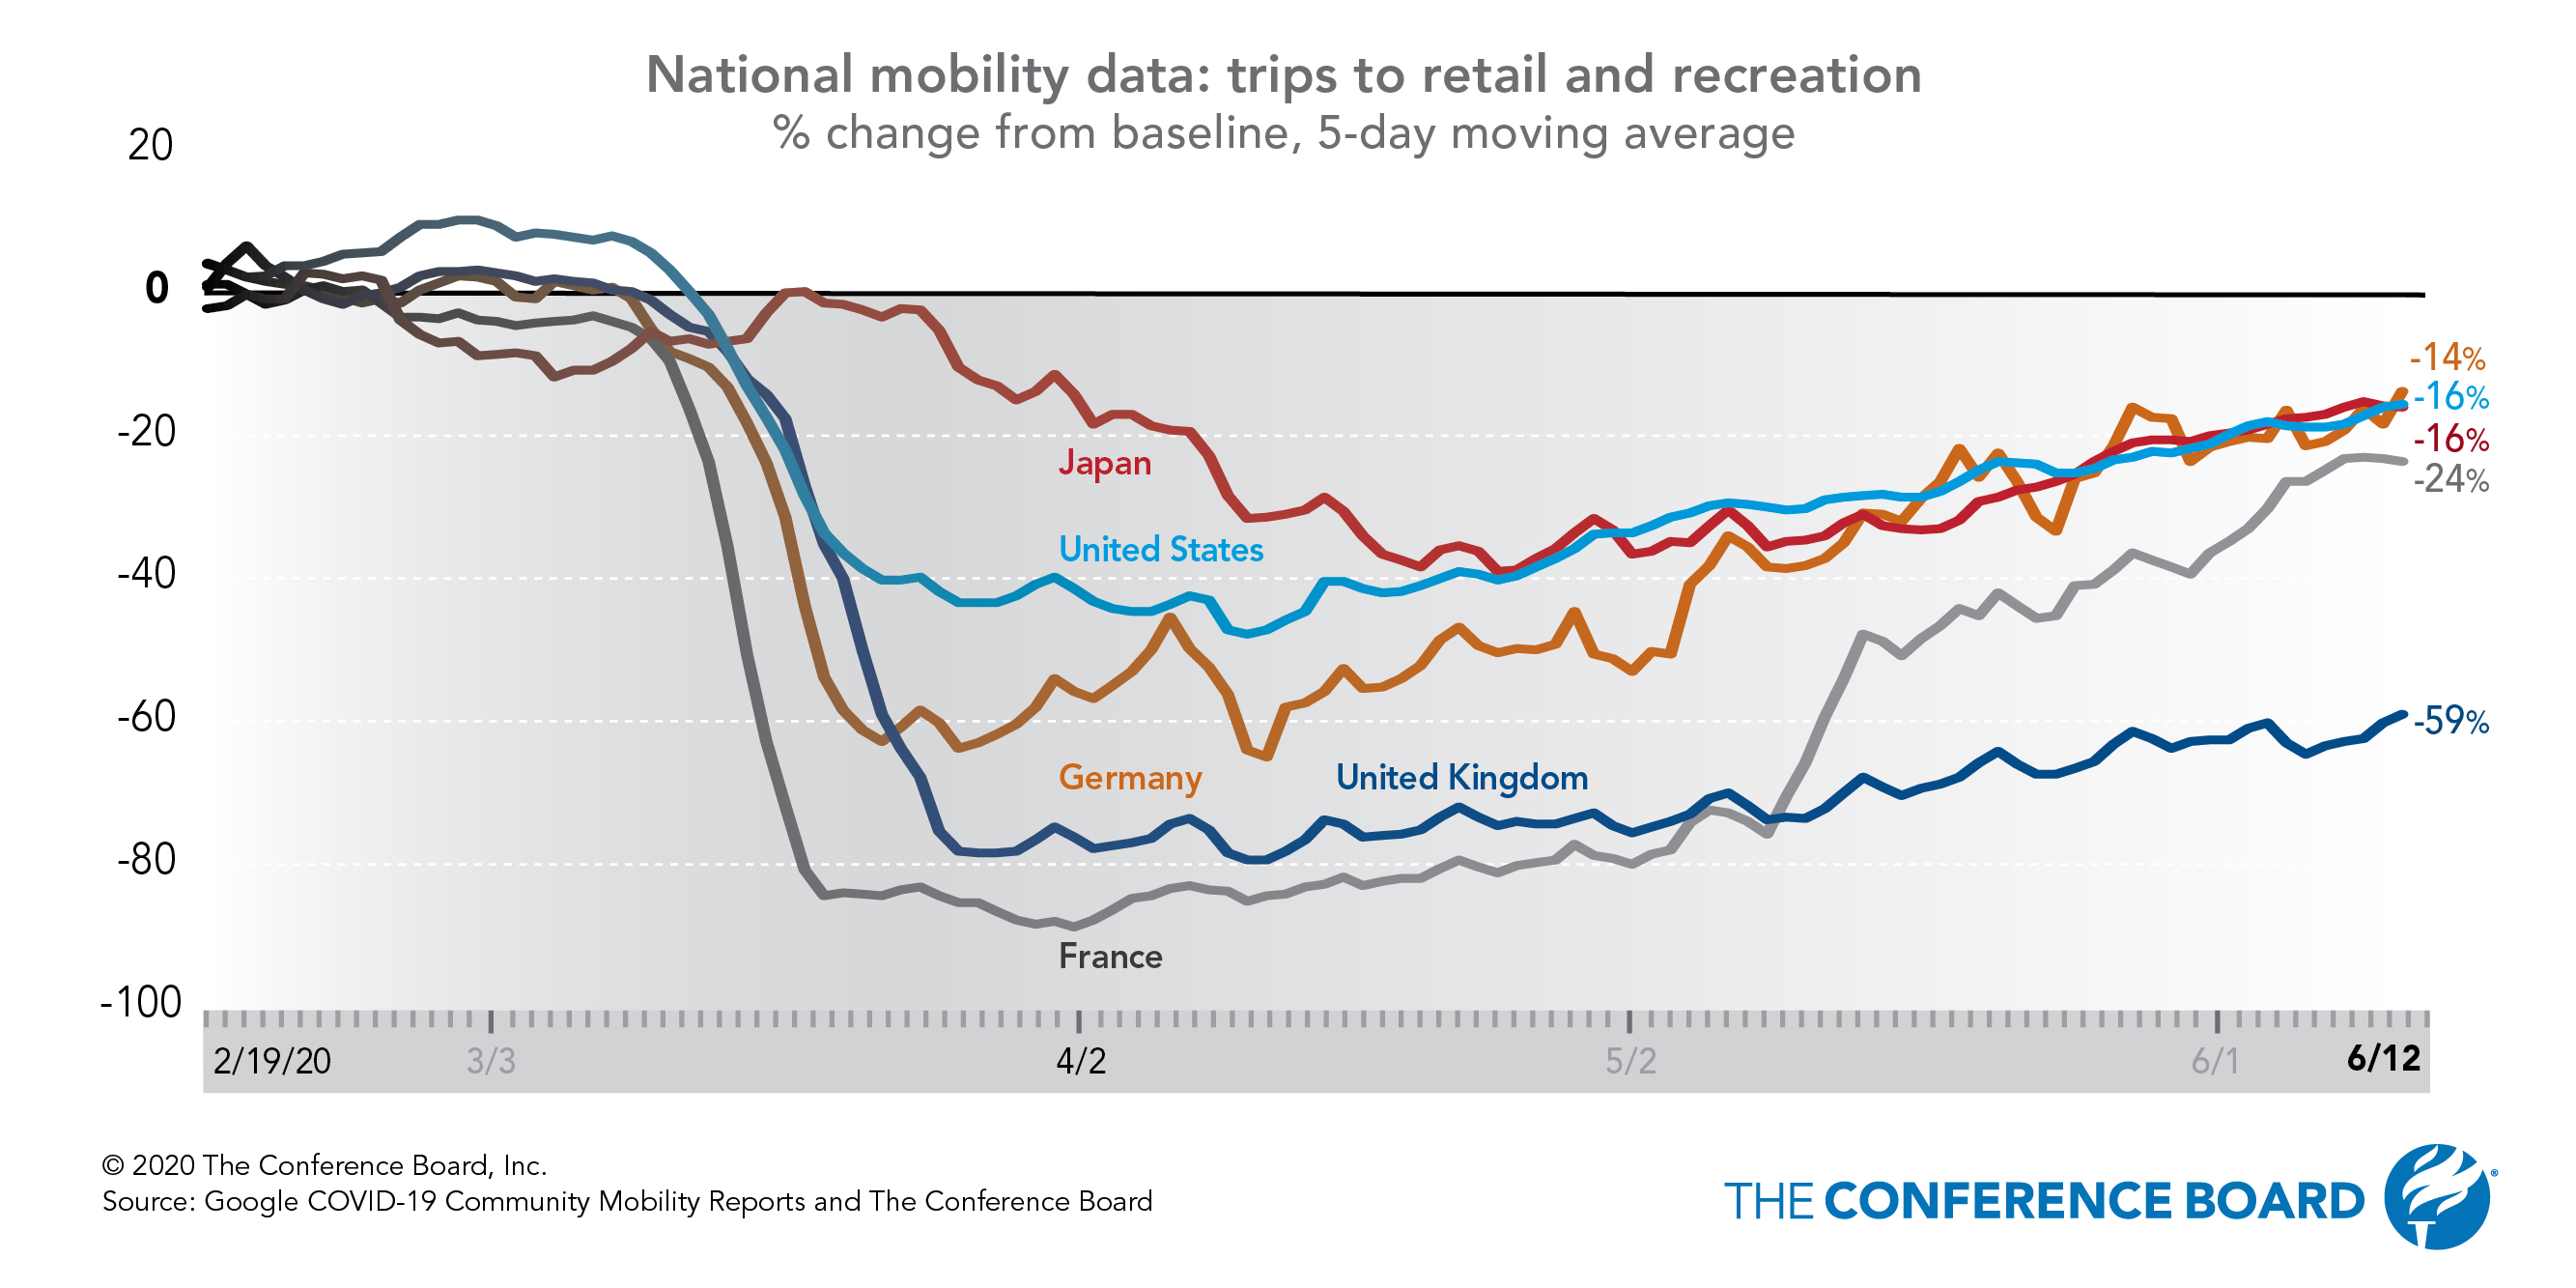 COVID-19 slump in retail and recreation traffic has long tail, creating drag on recovery